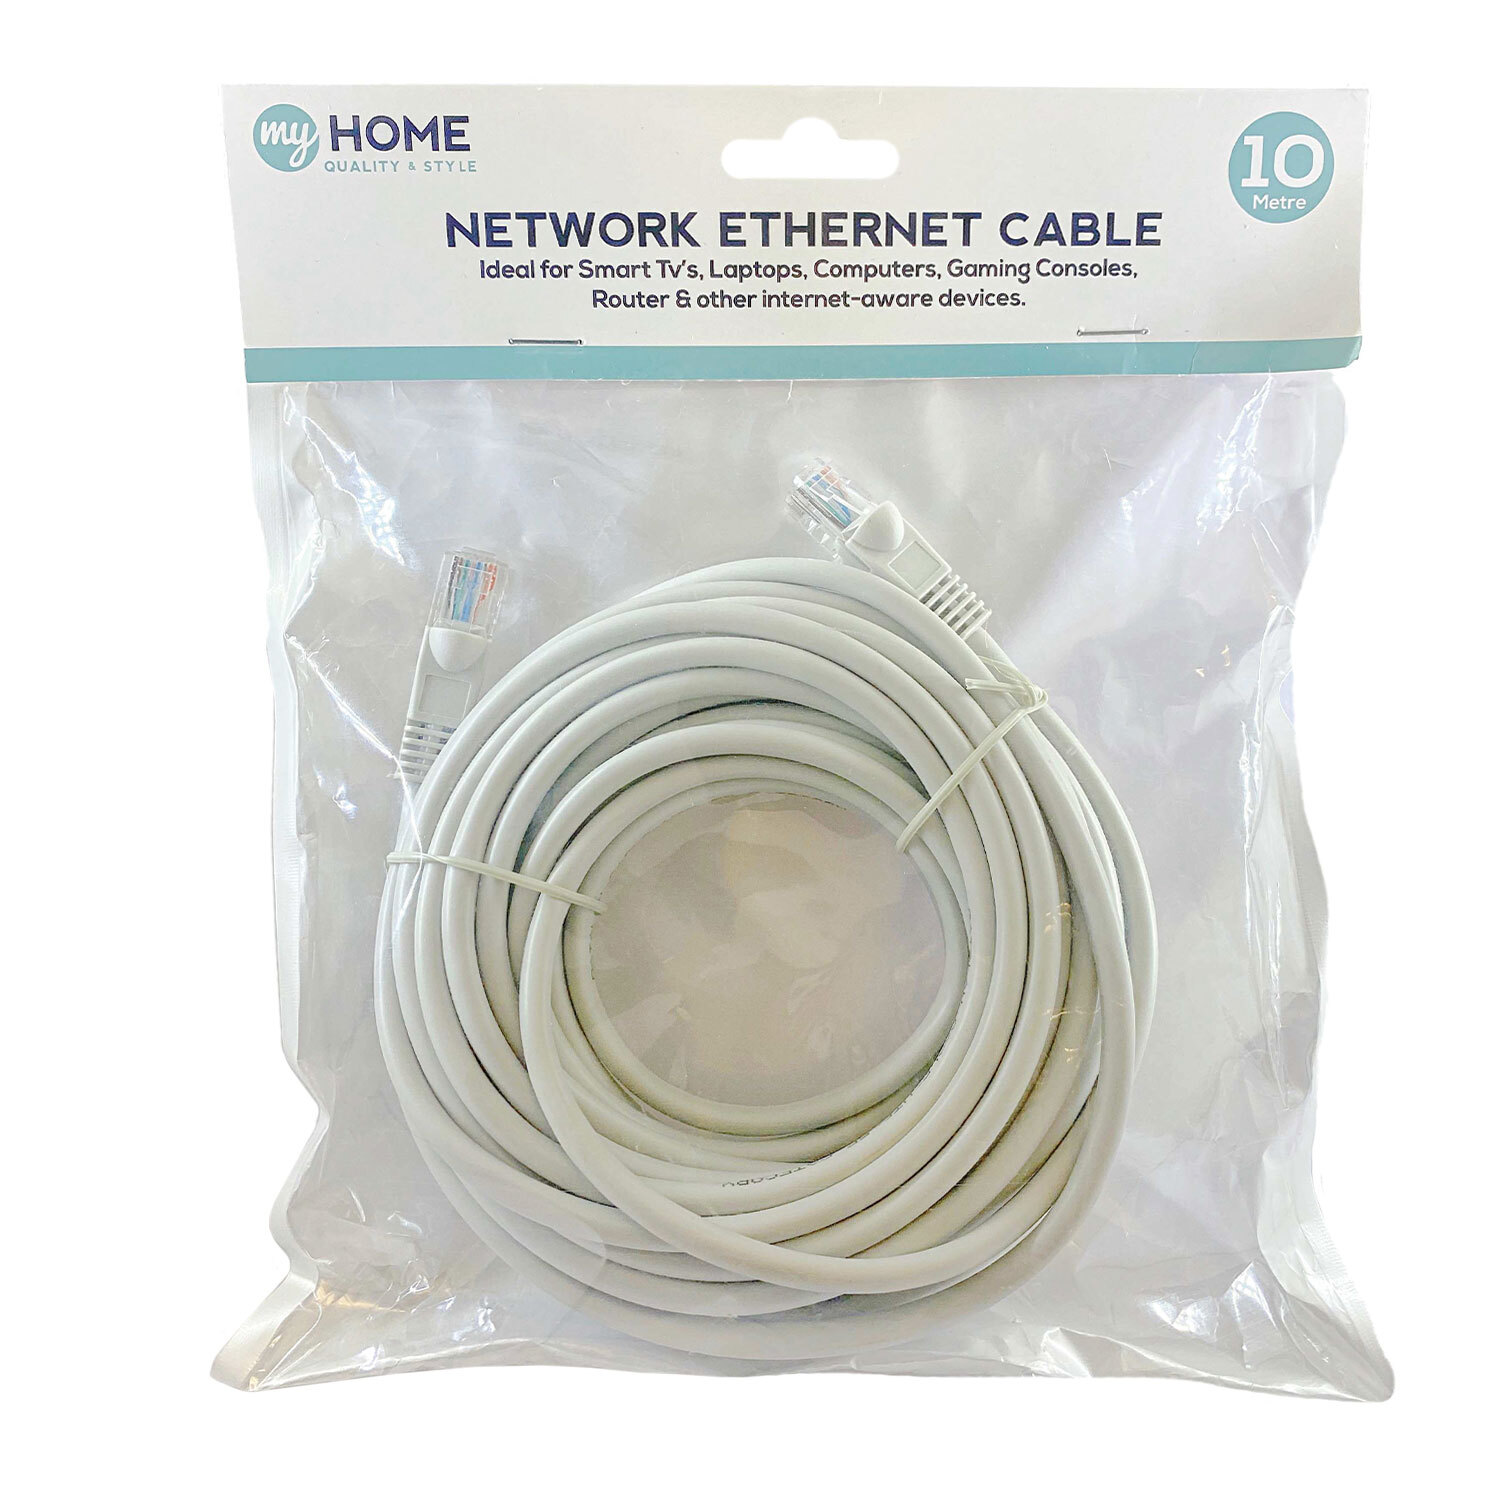 Network Ethernet Cable - White Image